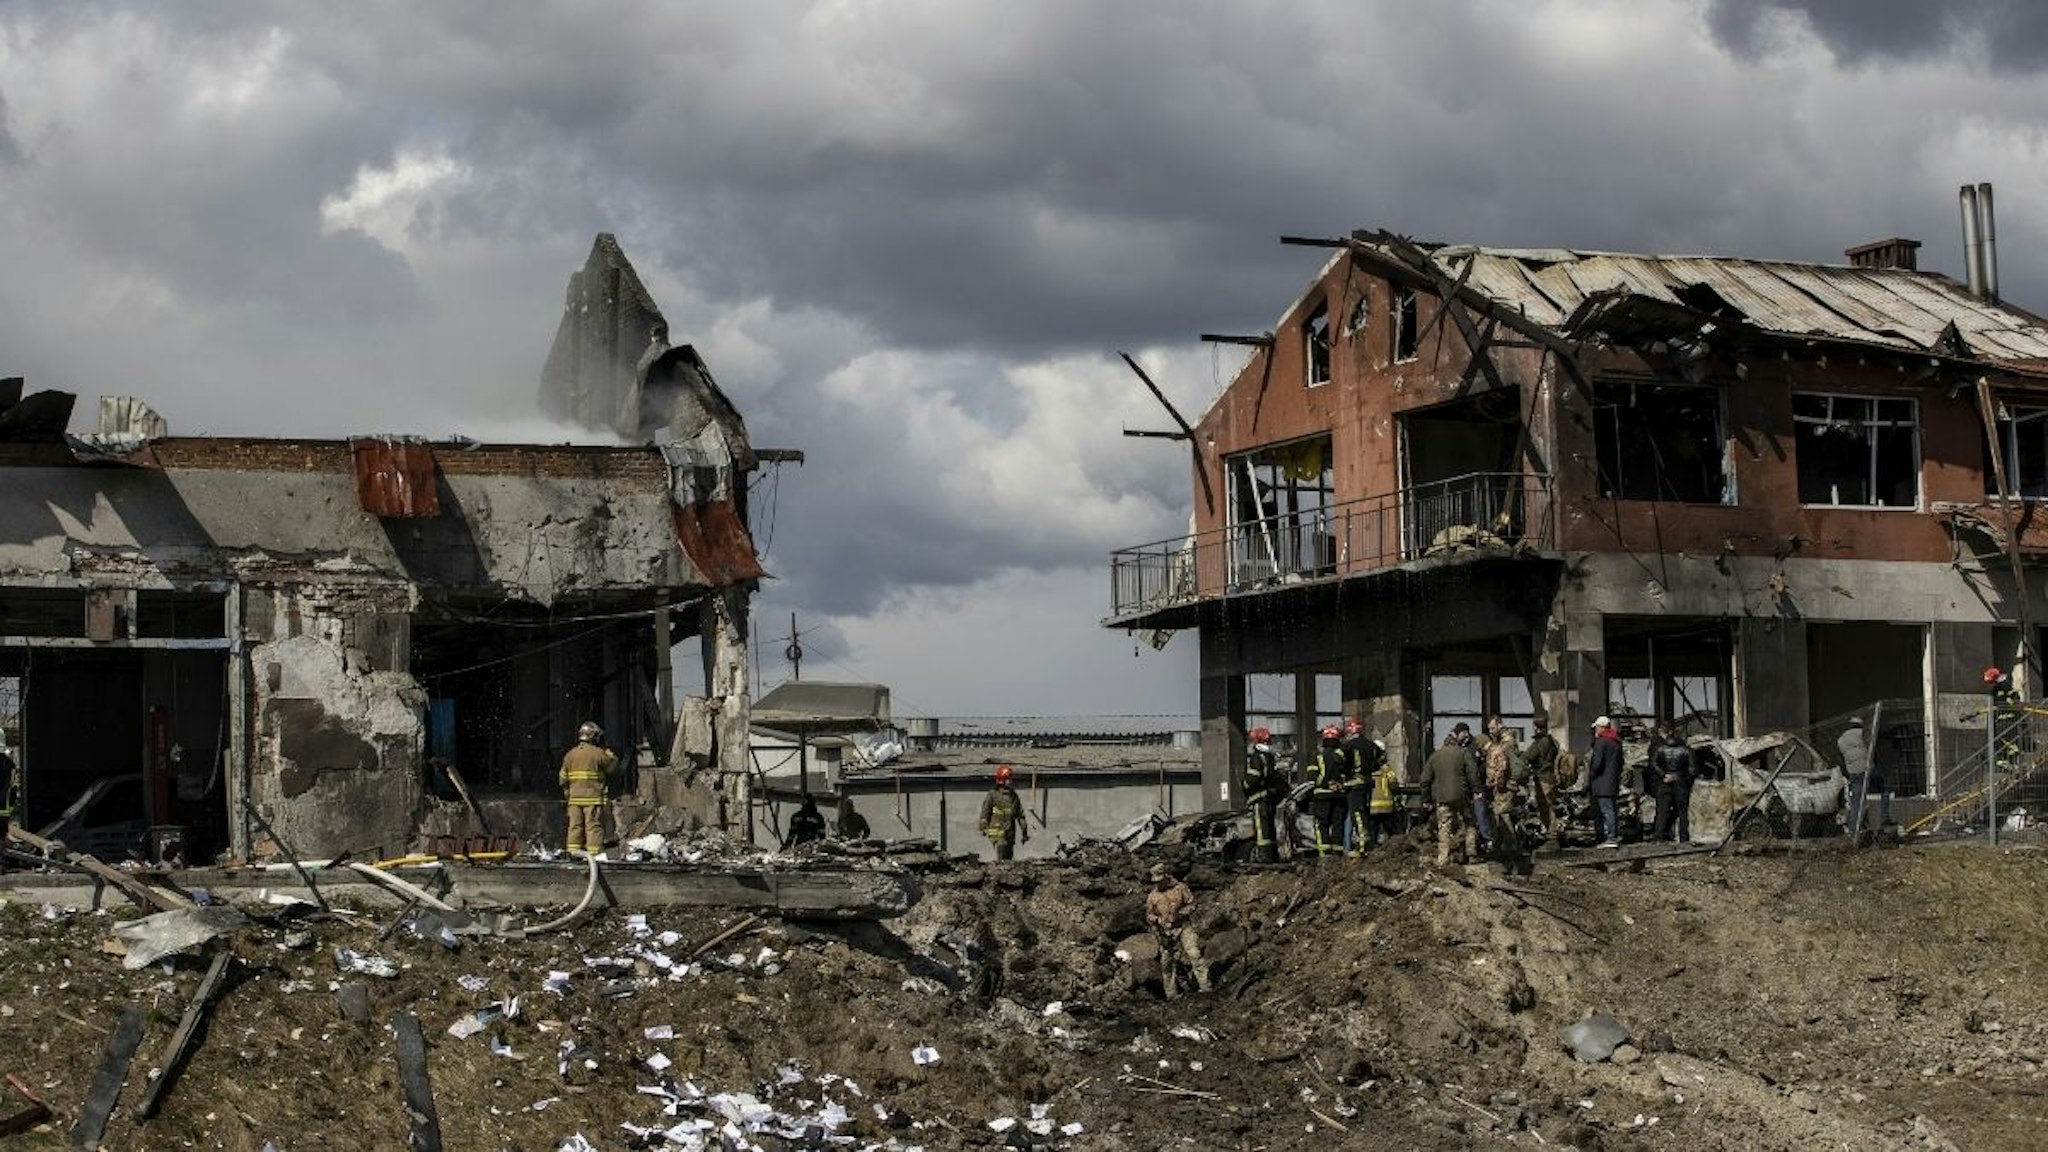 A view of damage after five aimed missile strikes hit Lviv, Ukraine on April 18, 2022. At least 6 killed and 8 injured in the strikes said city governor. Ukrainian officials said Russian missile strikes on the western city of Lviv on Monday killed at least six people and wounded several more.